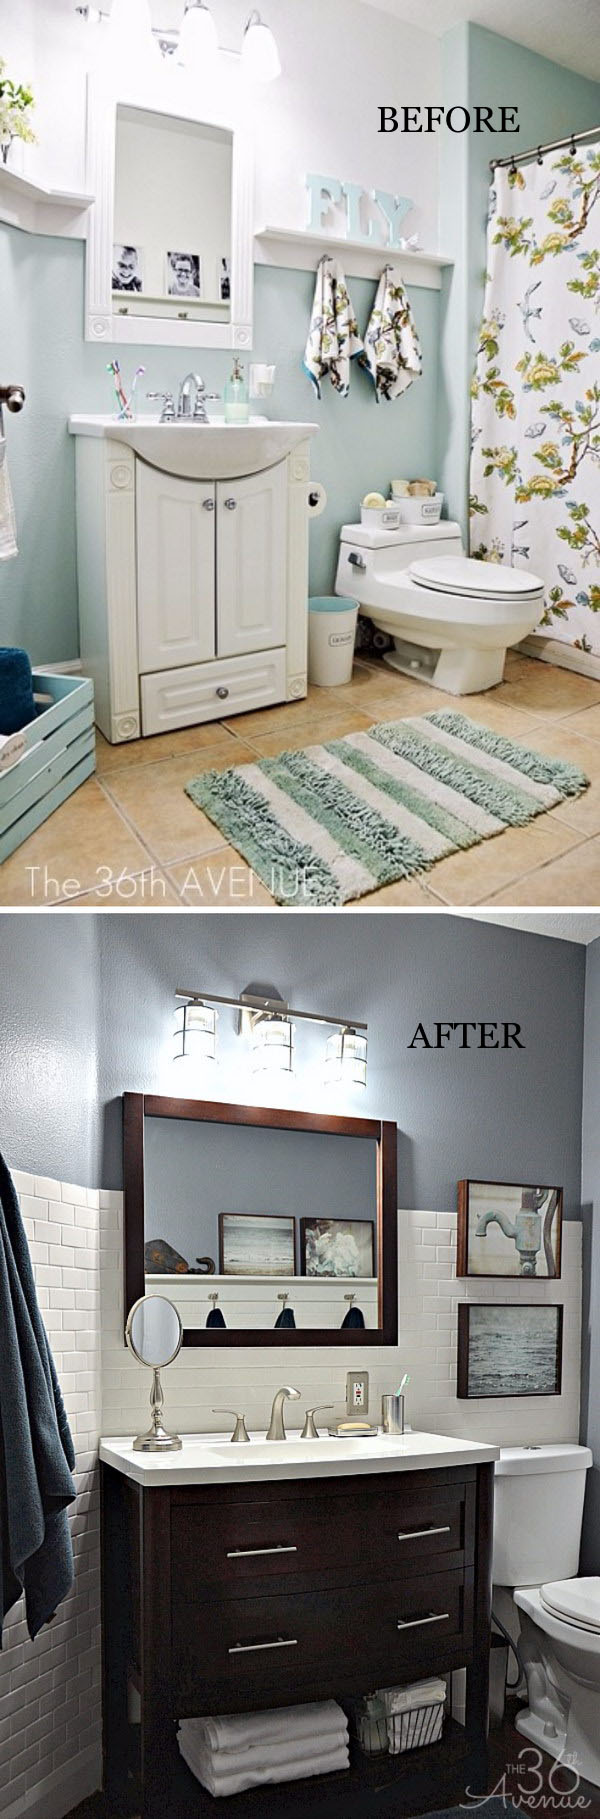 Modern Bathroom Makeover With Metallic Accents, Dark Furniture And White Subway Tile. 